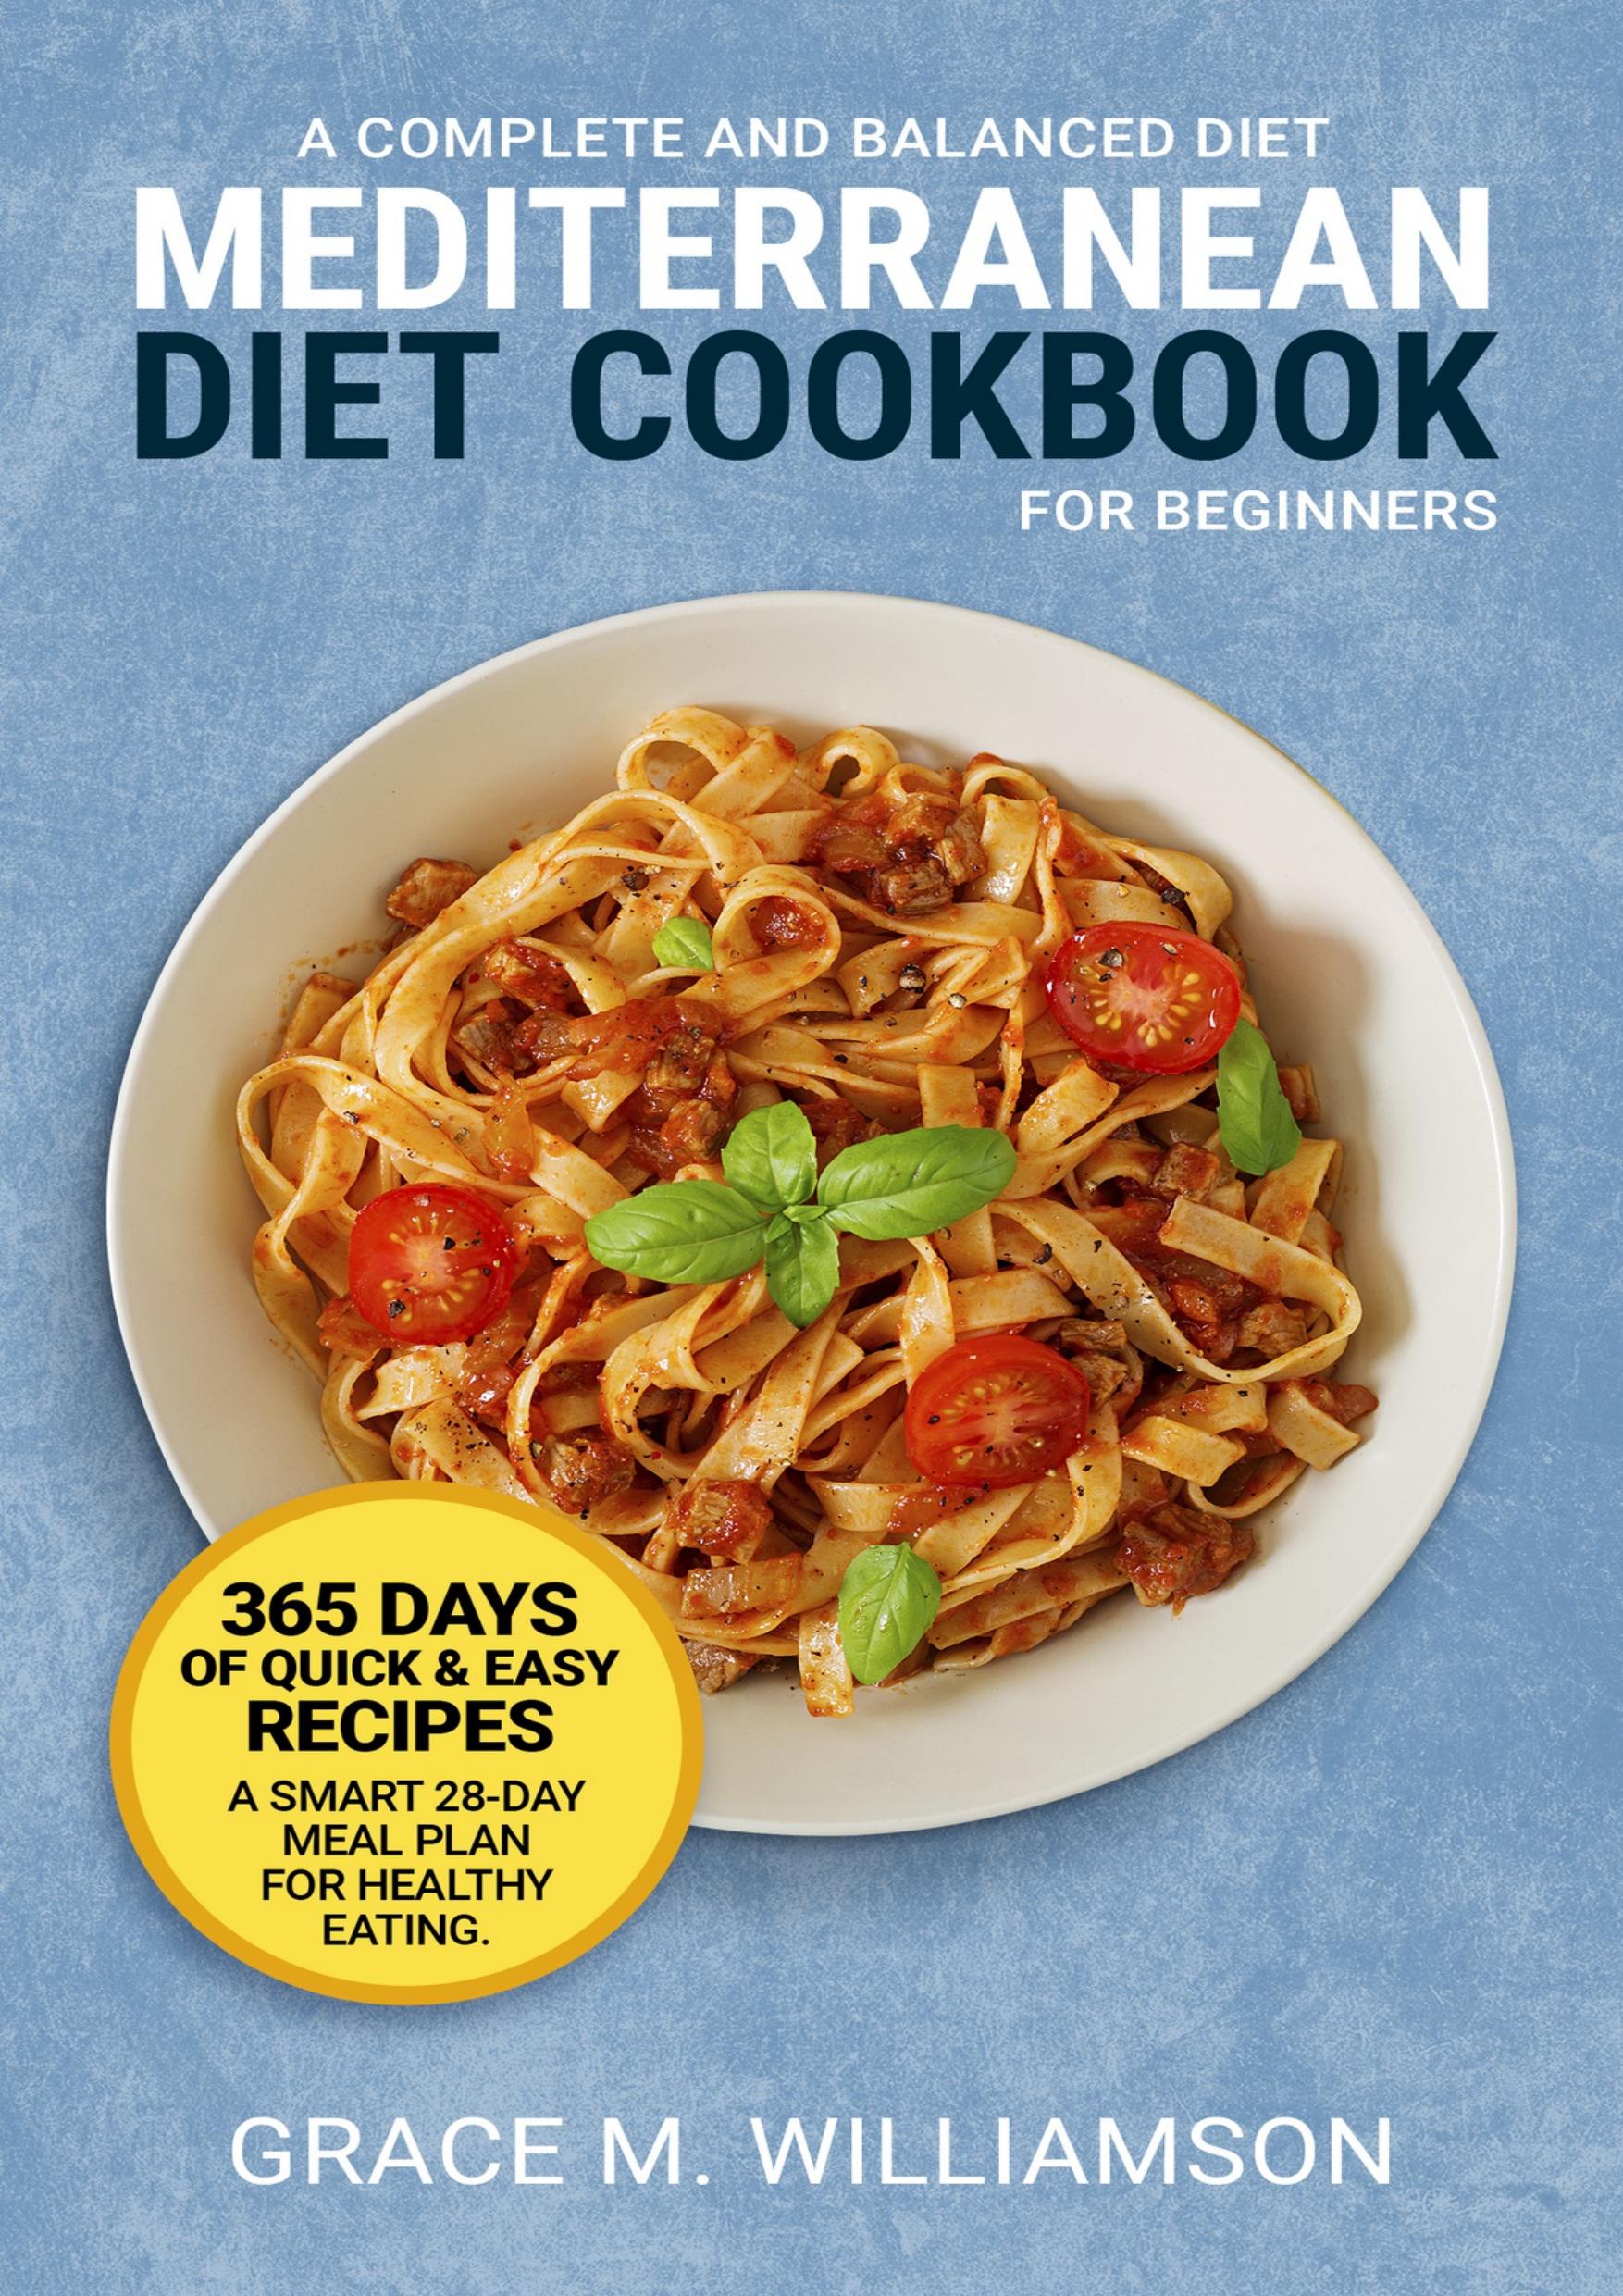 Mediterranean Diet Cookbook for Beginners: A Complete and Balanced Diet: 365 Days of Quick and Easy Recipes. A Smart 28-Day Meal Plan For Healthy Eating (Lose Weight With Grace 1) by Williamson Grace M